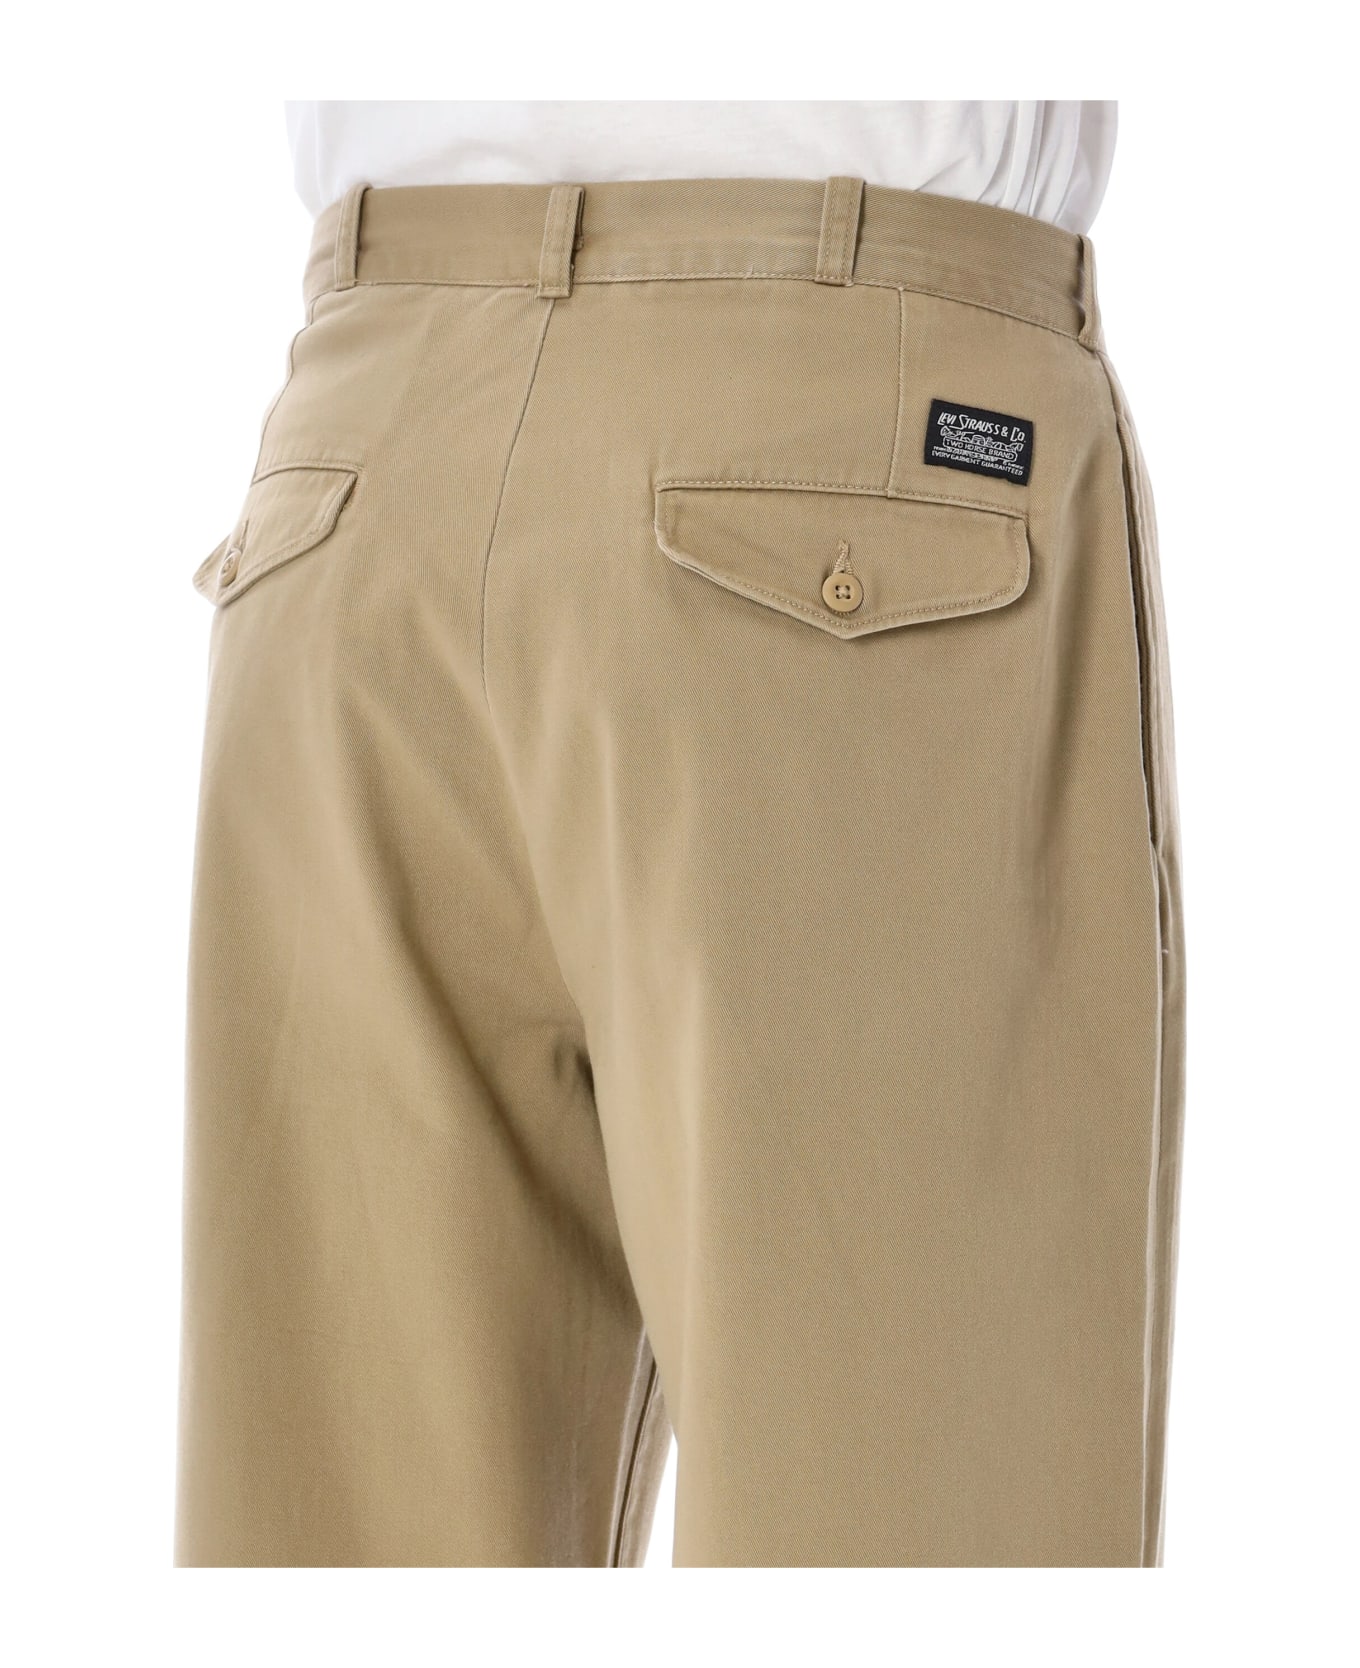 Levi's Skate Loose Chino - BEIGE ボトムス